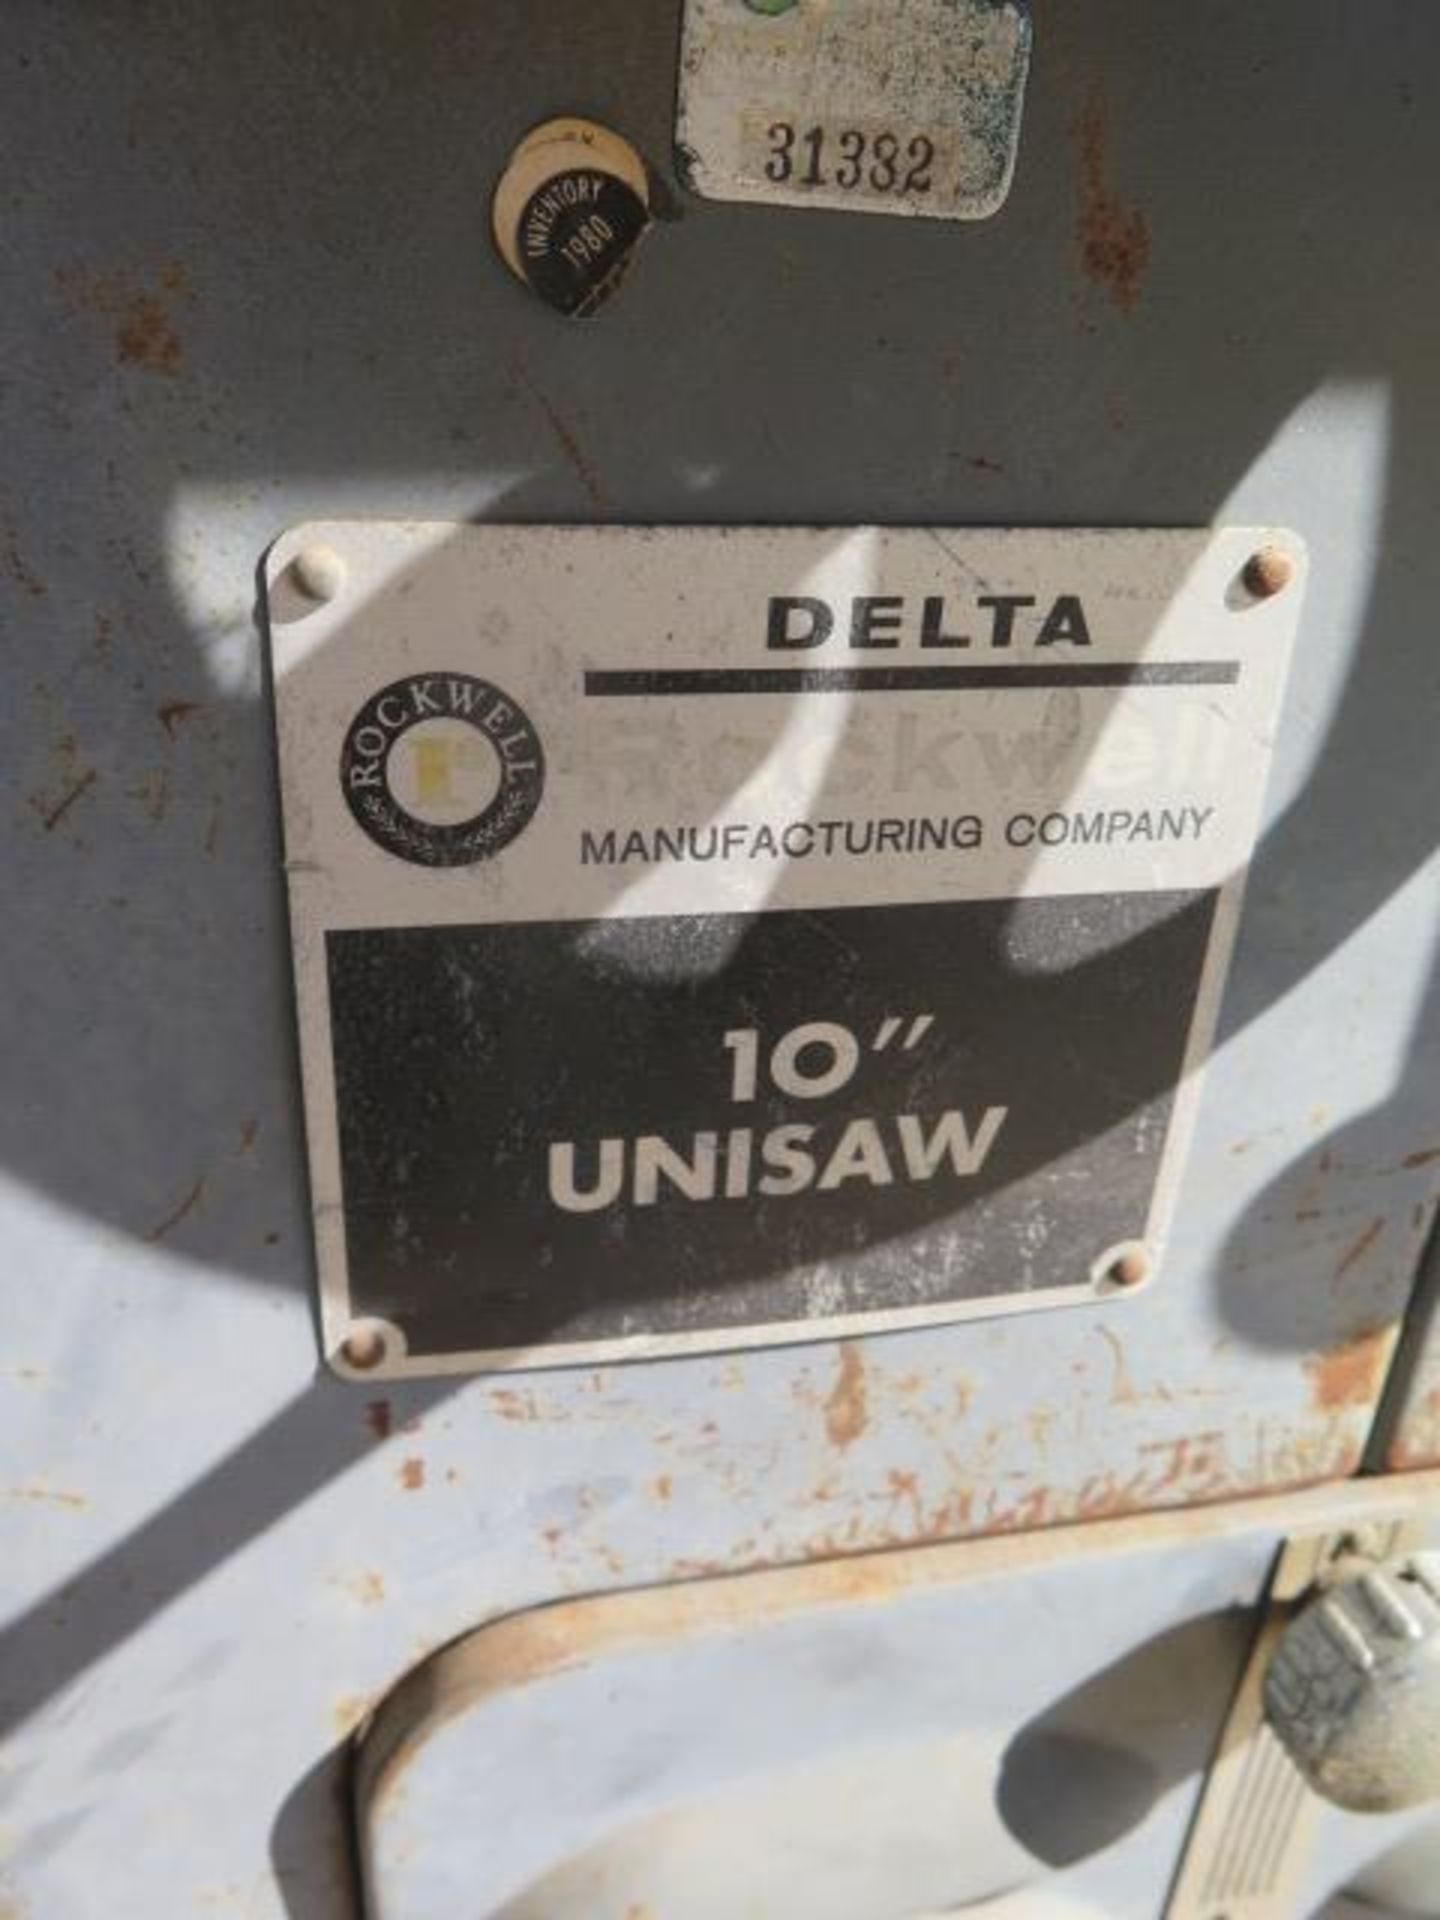 Delta / Rockwell 10” Unisaw Tilting Arbor Table Saw (SOLD AS-IS - NO WARRANTY) - Image 3 of 6